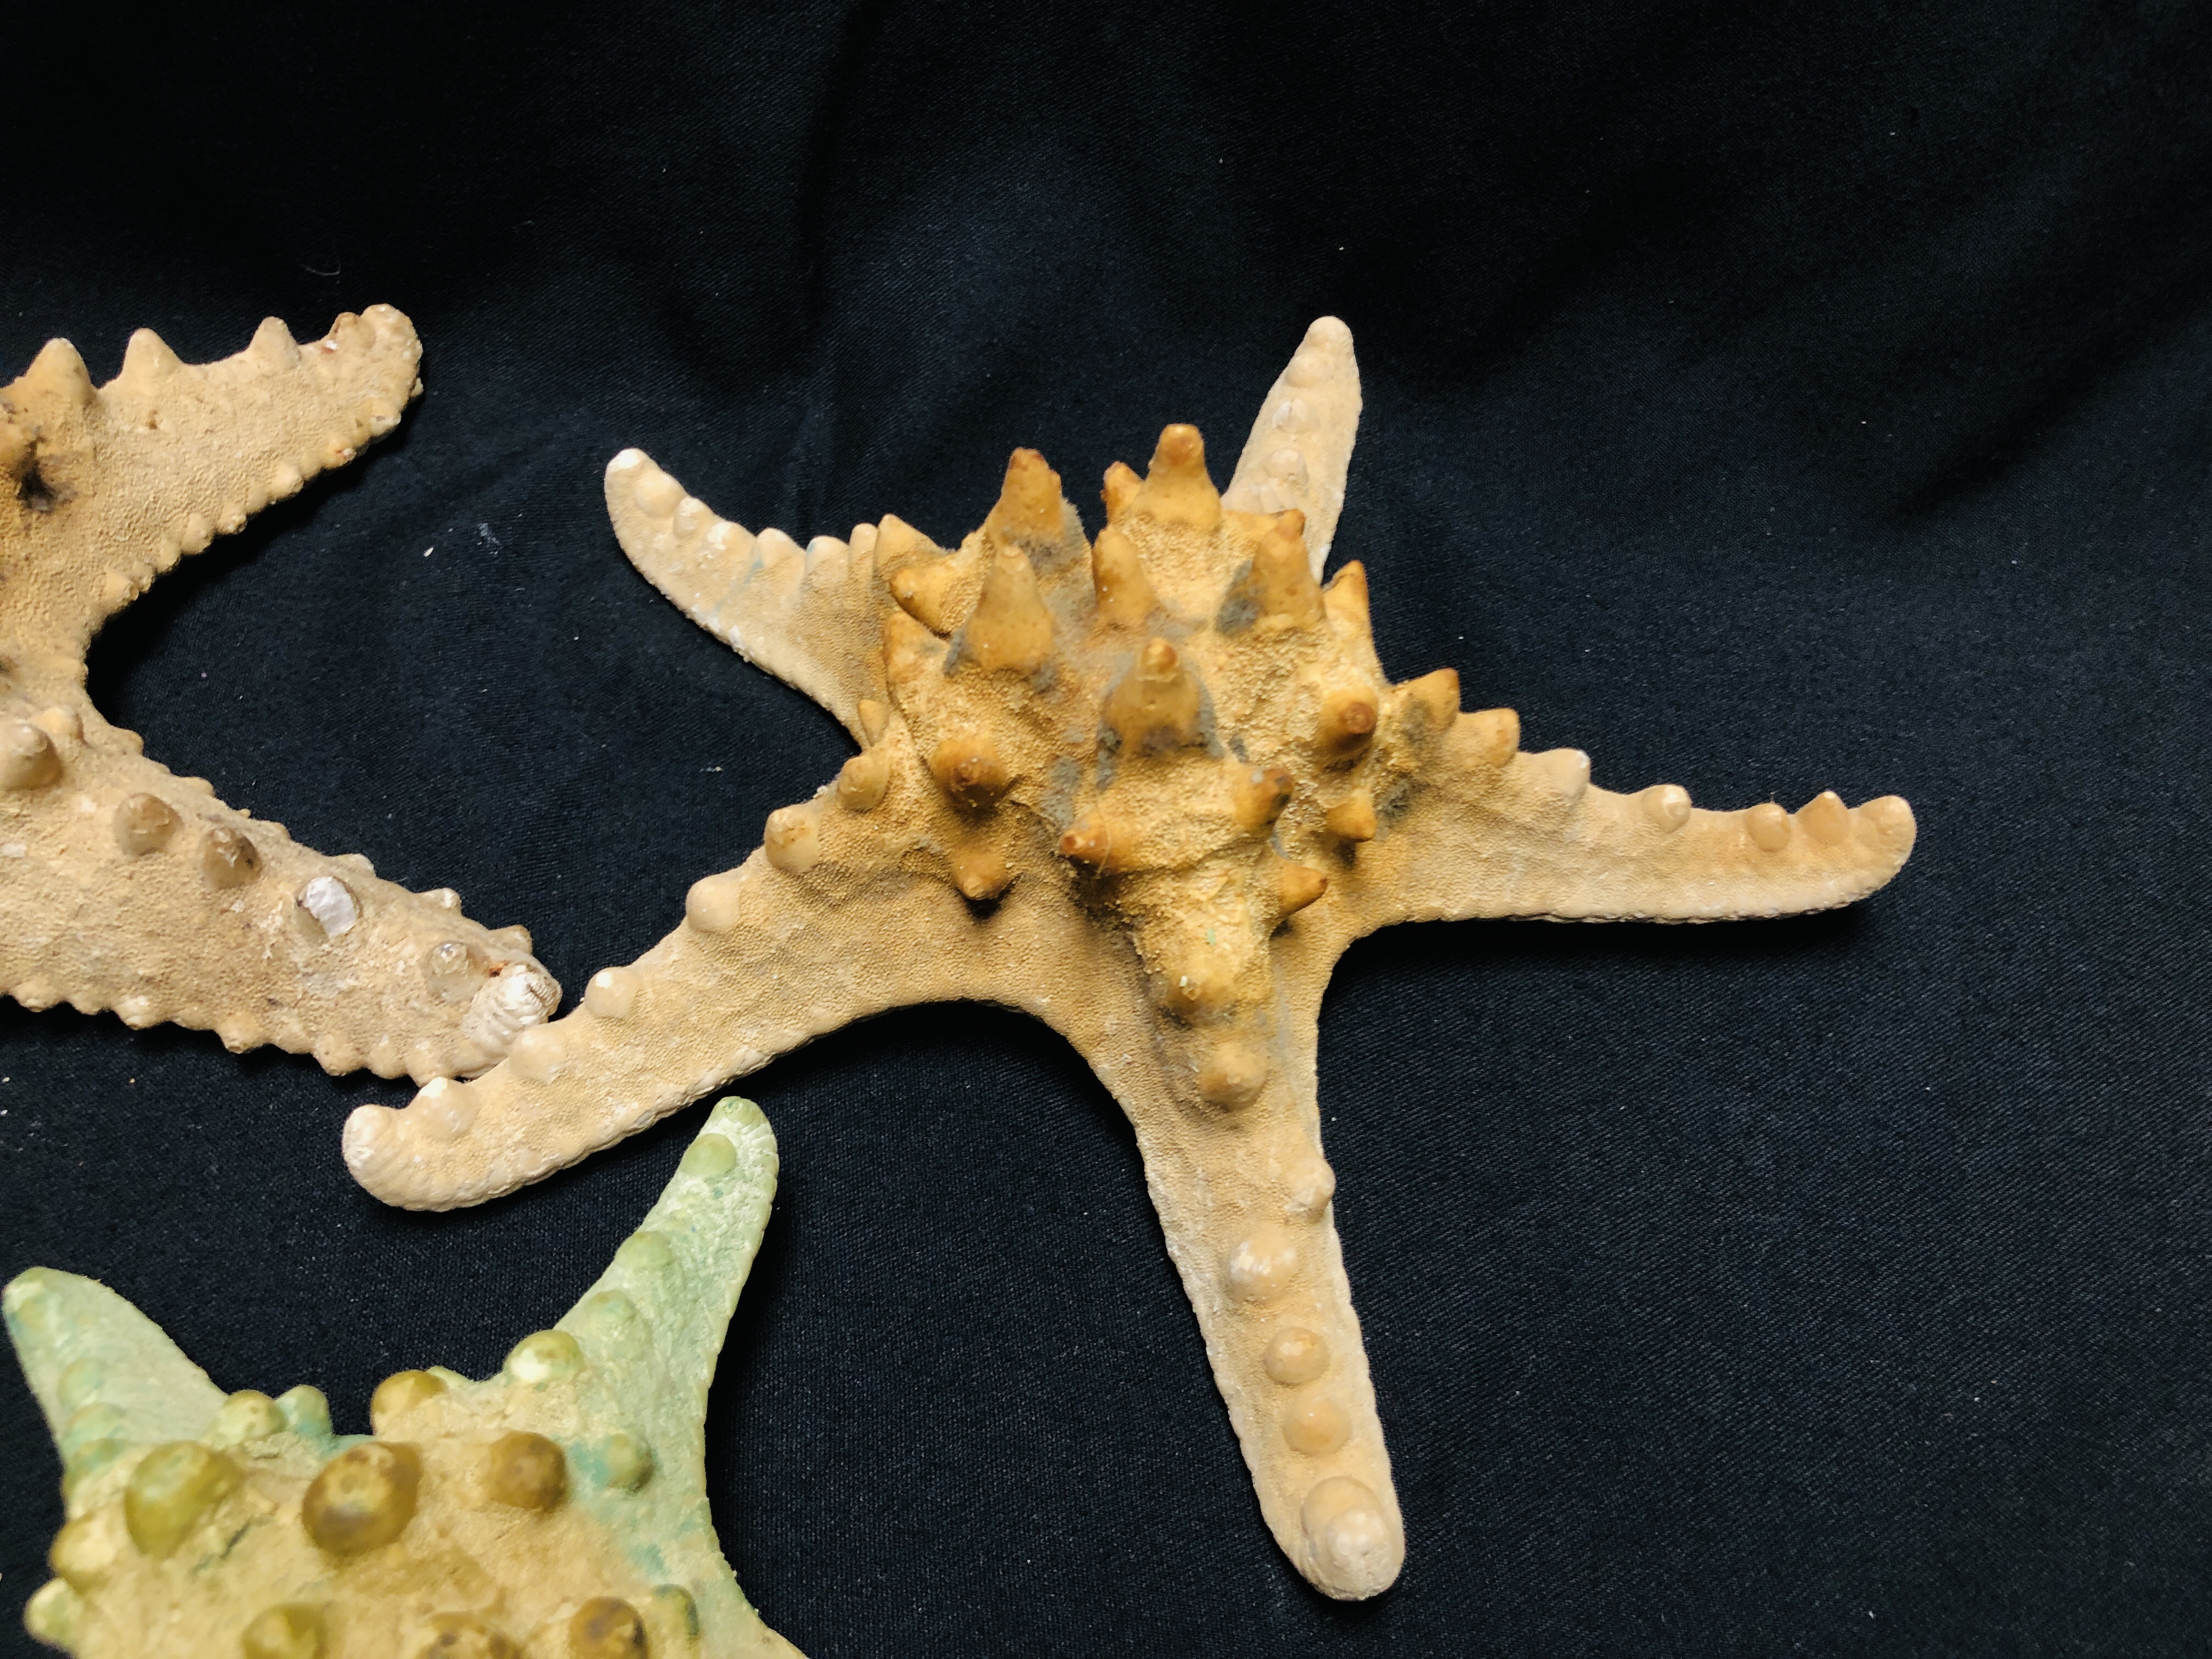 A GROUP OF 5 STARFISH, VARIOUS SIZES AND SPECIES. - Image 3 of 5